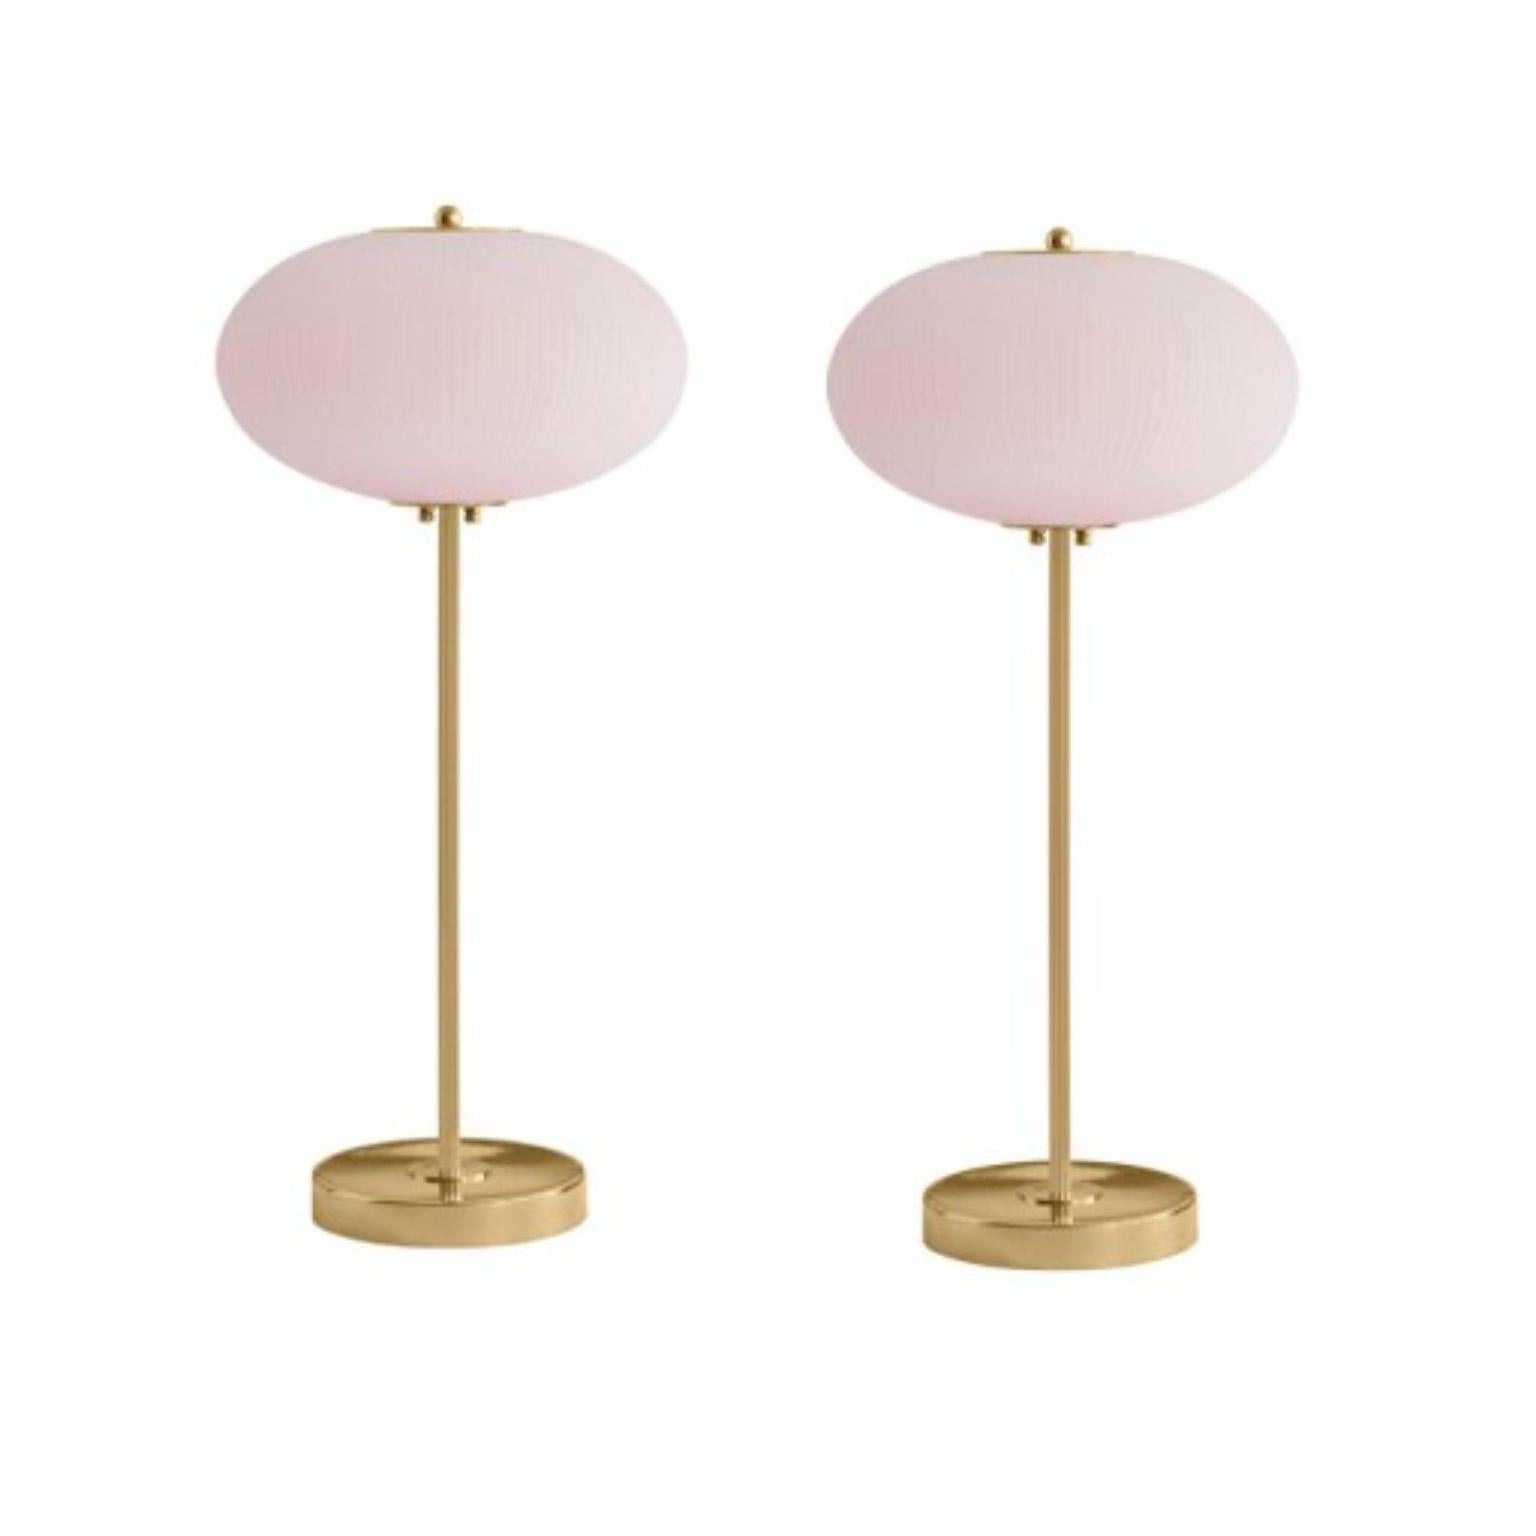 Table lamp China 07 by Magic Circus Editions
Dimensions: H 70 x W 32 x D 32 cm
Materials: Brass, mouth blown glass sculpted with a diamond saw
Colour: soft rose

Available finishes: Brass, nickel
Available colours: enamel soft white, soft